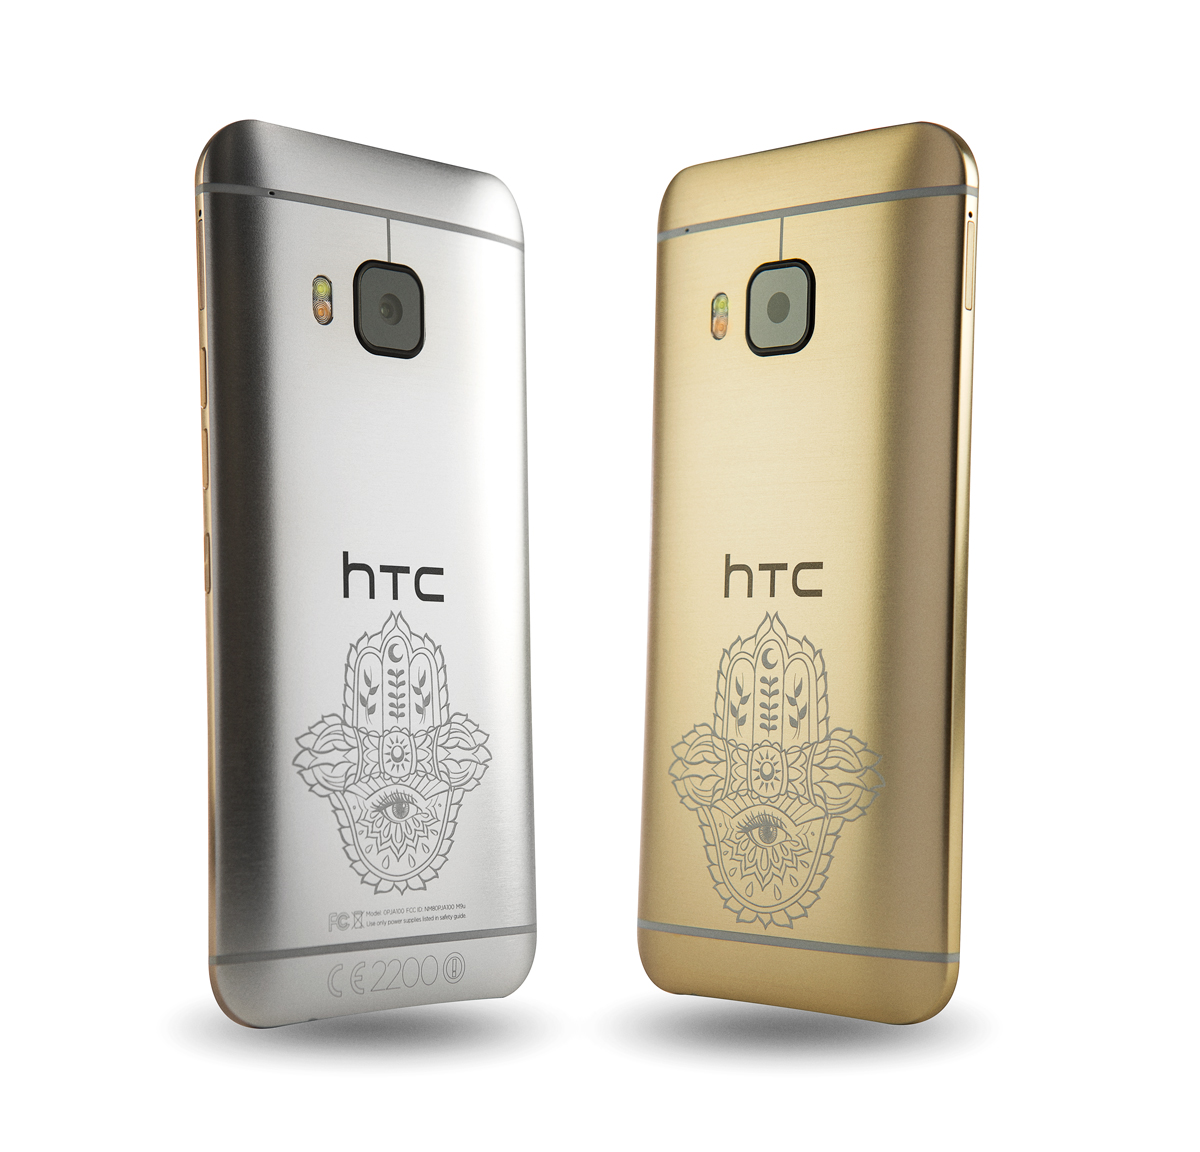 HTC ONE M9 INK GOLD HANDSET AND SILVER HANDSET LOW RES